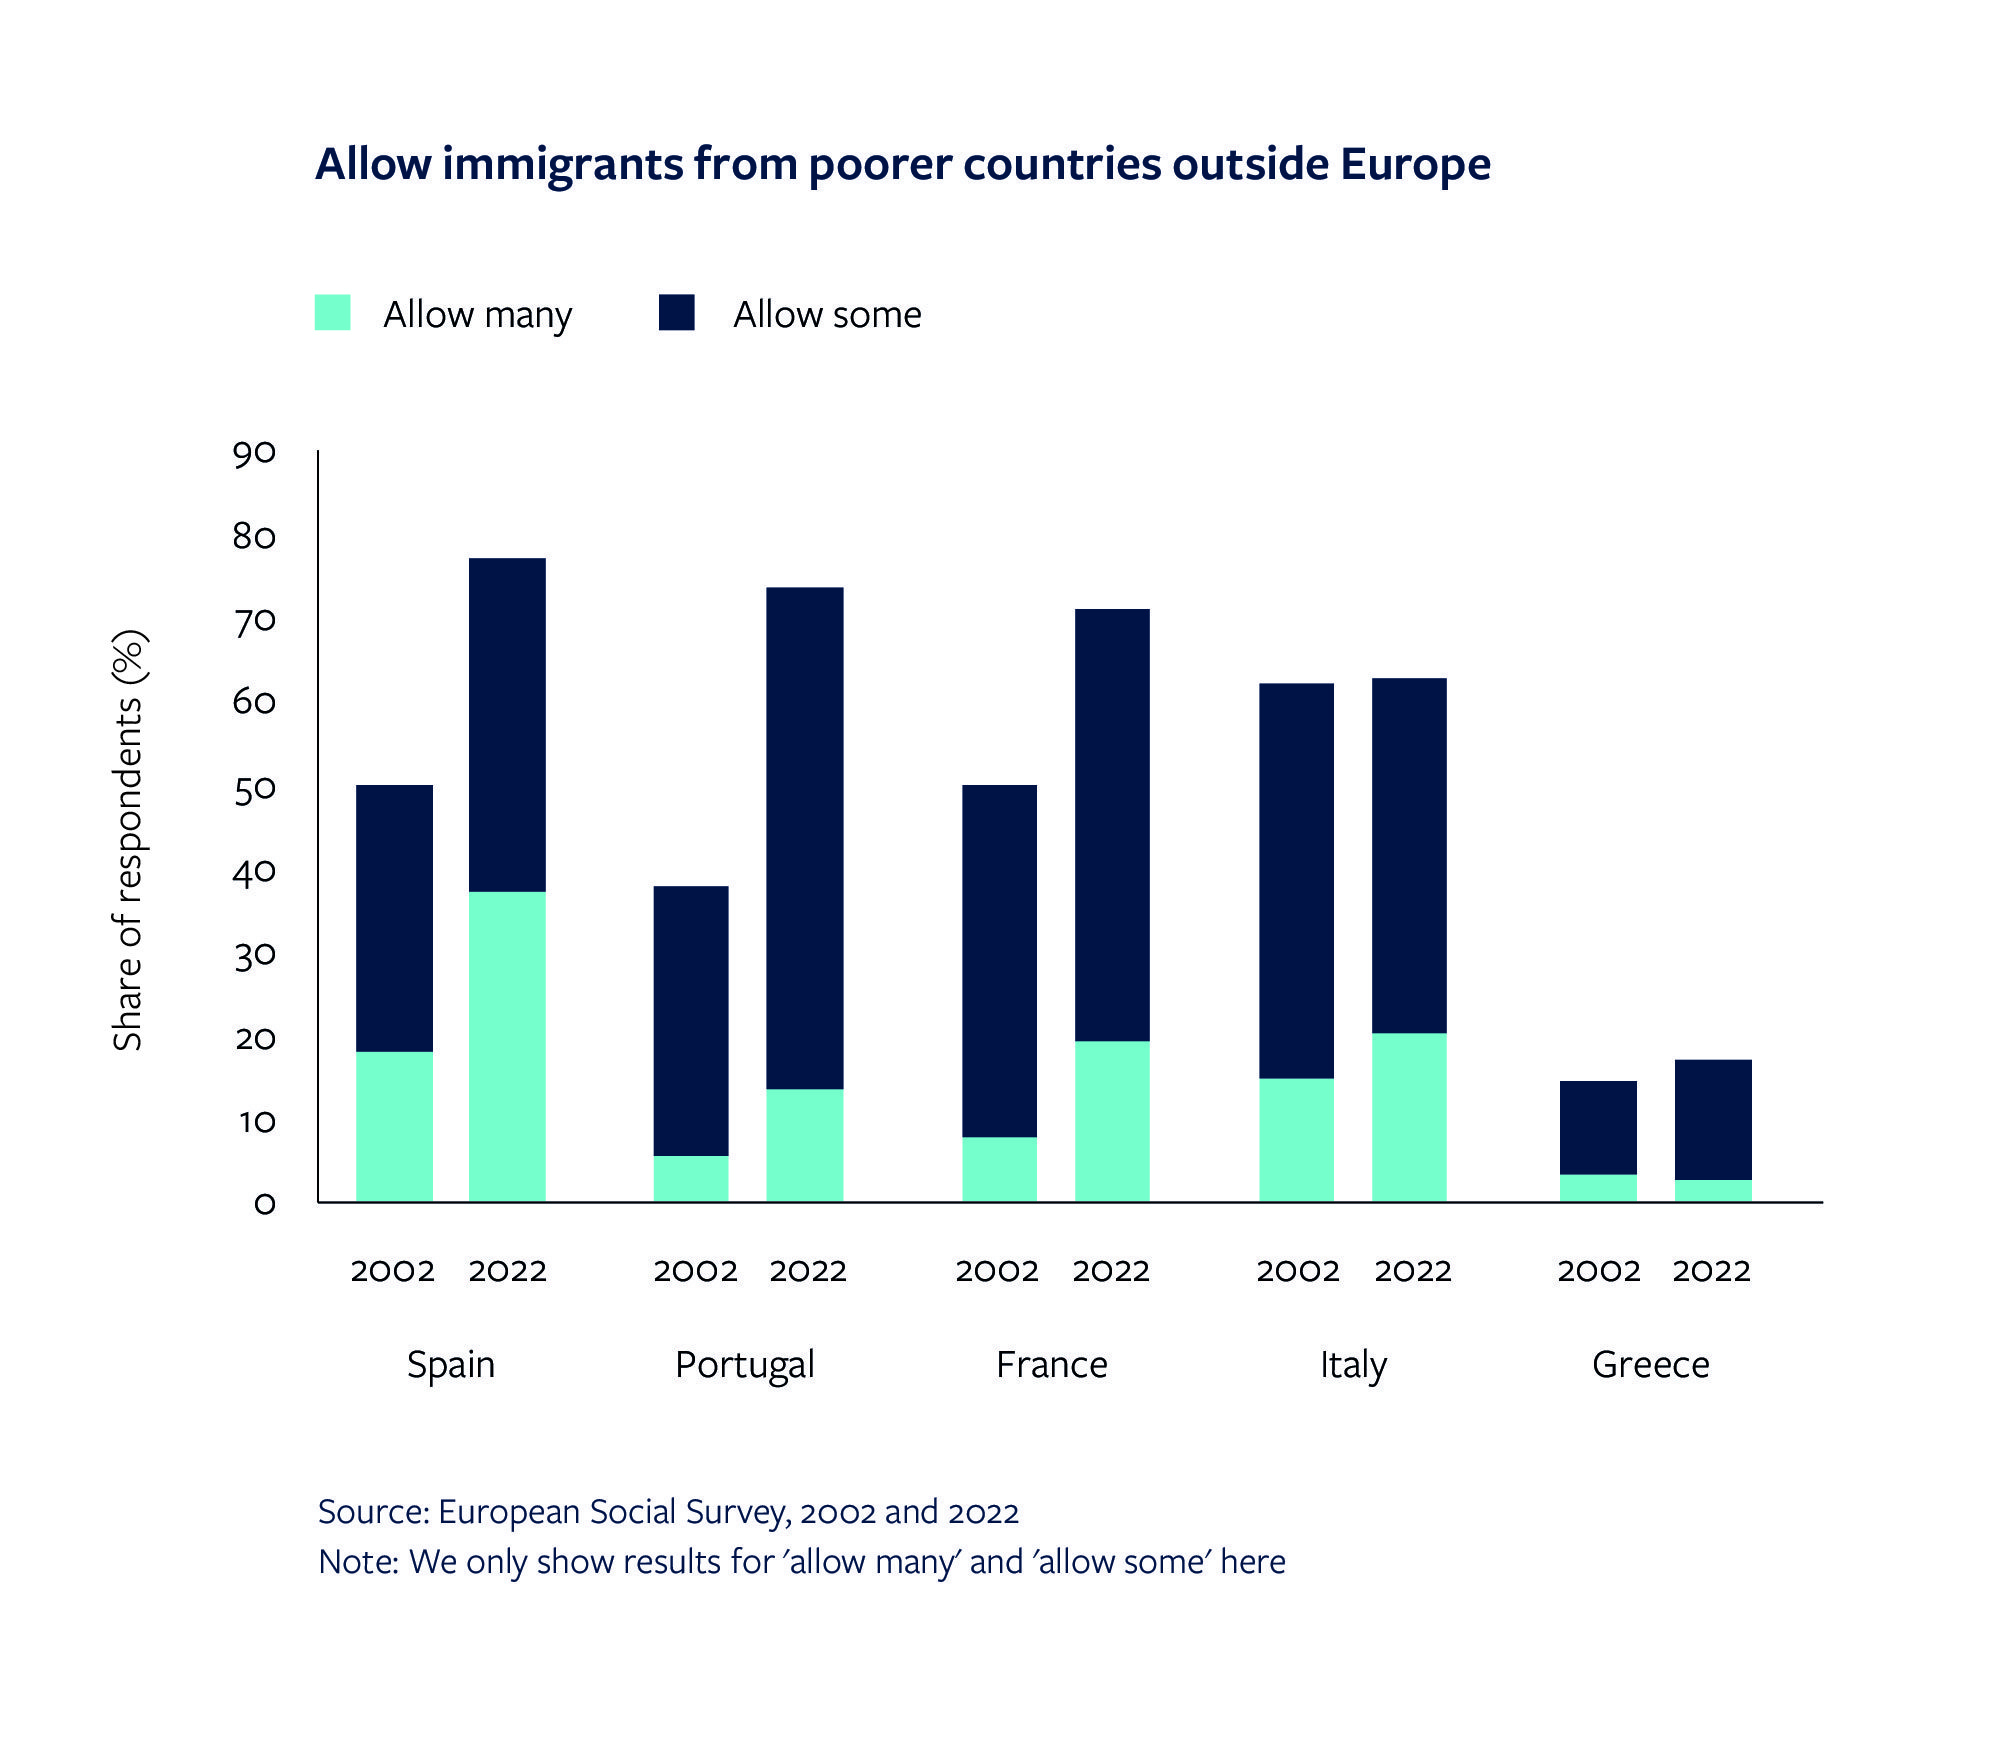 A survey showing public attitudes towards allowing immigrants from poorer countries outside Europe.